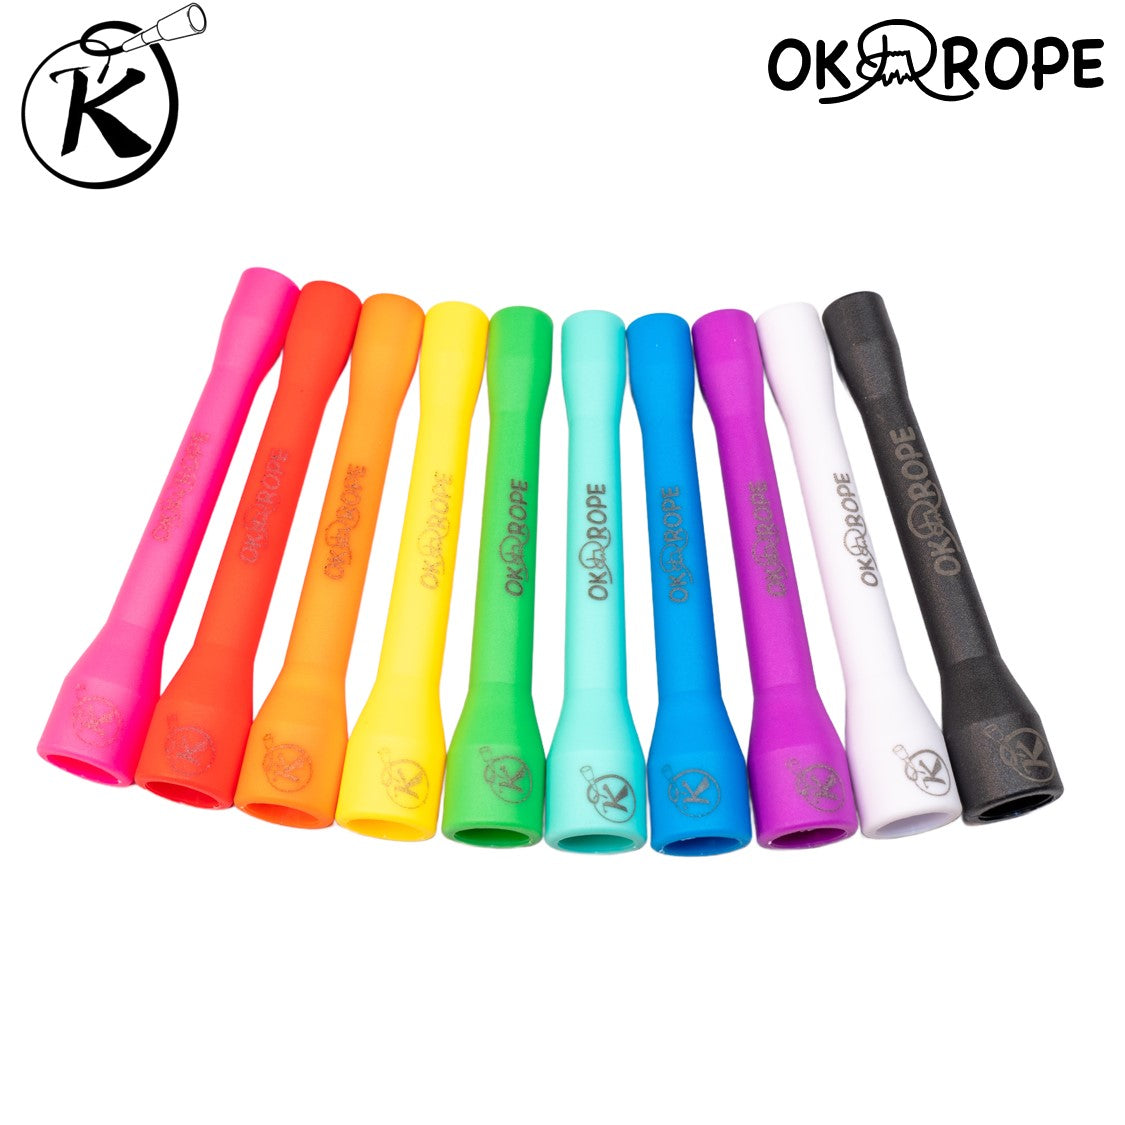 OK Middle Handle (1pc)